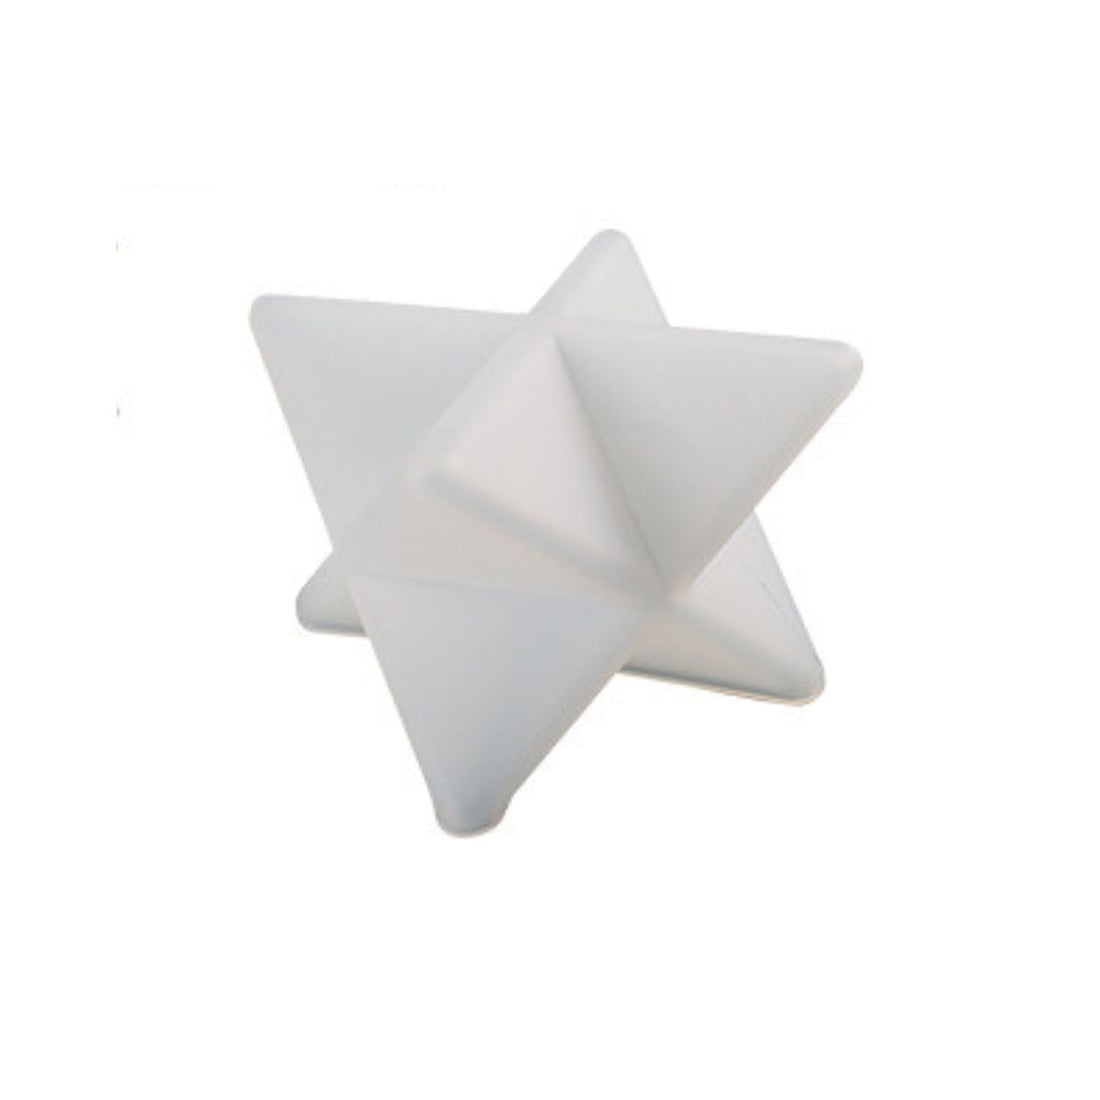 3D Star Shape Resin Silicone Mold - 6 different sizes